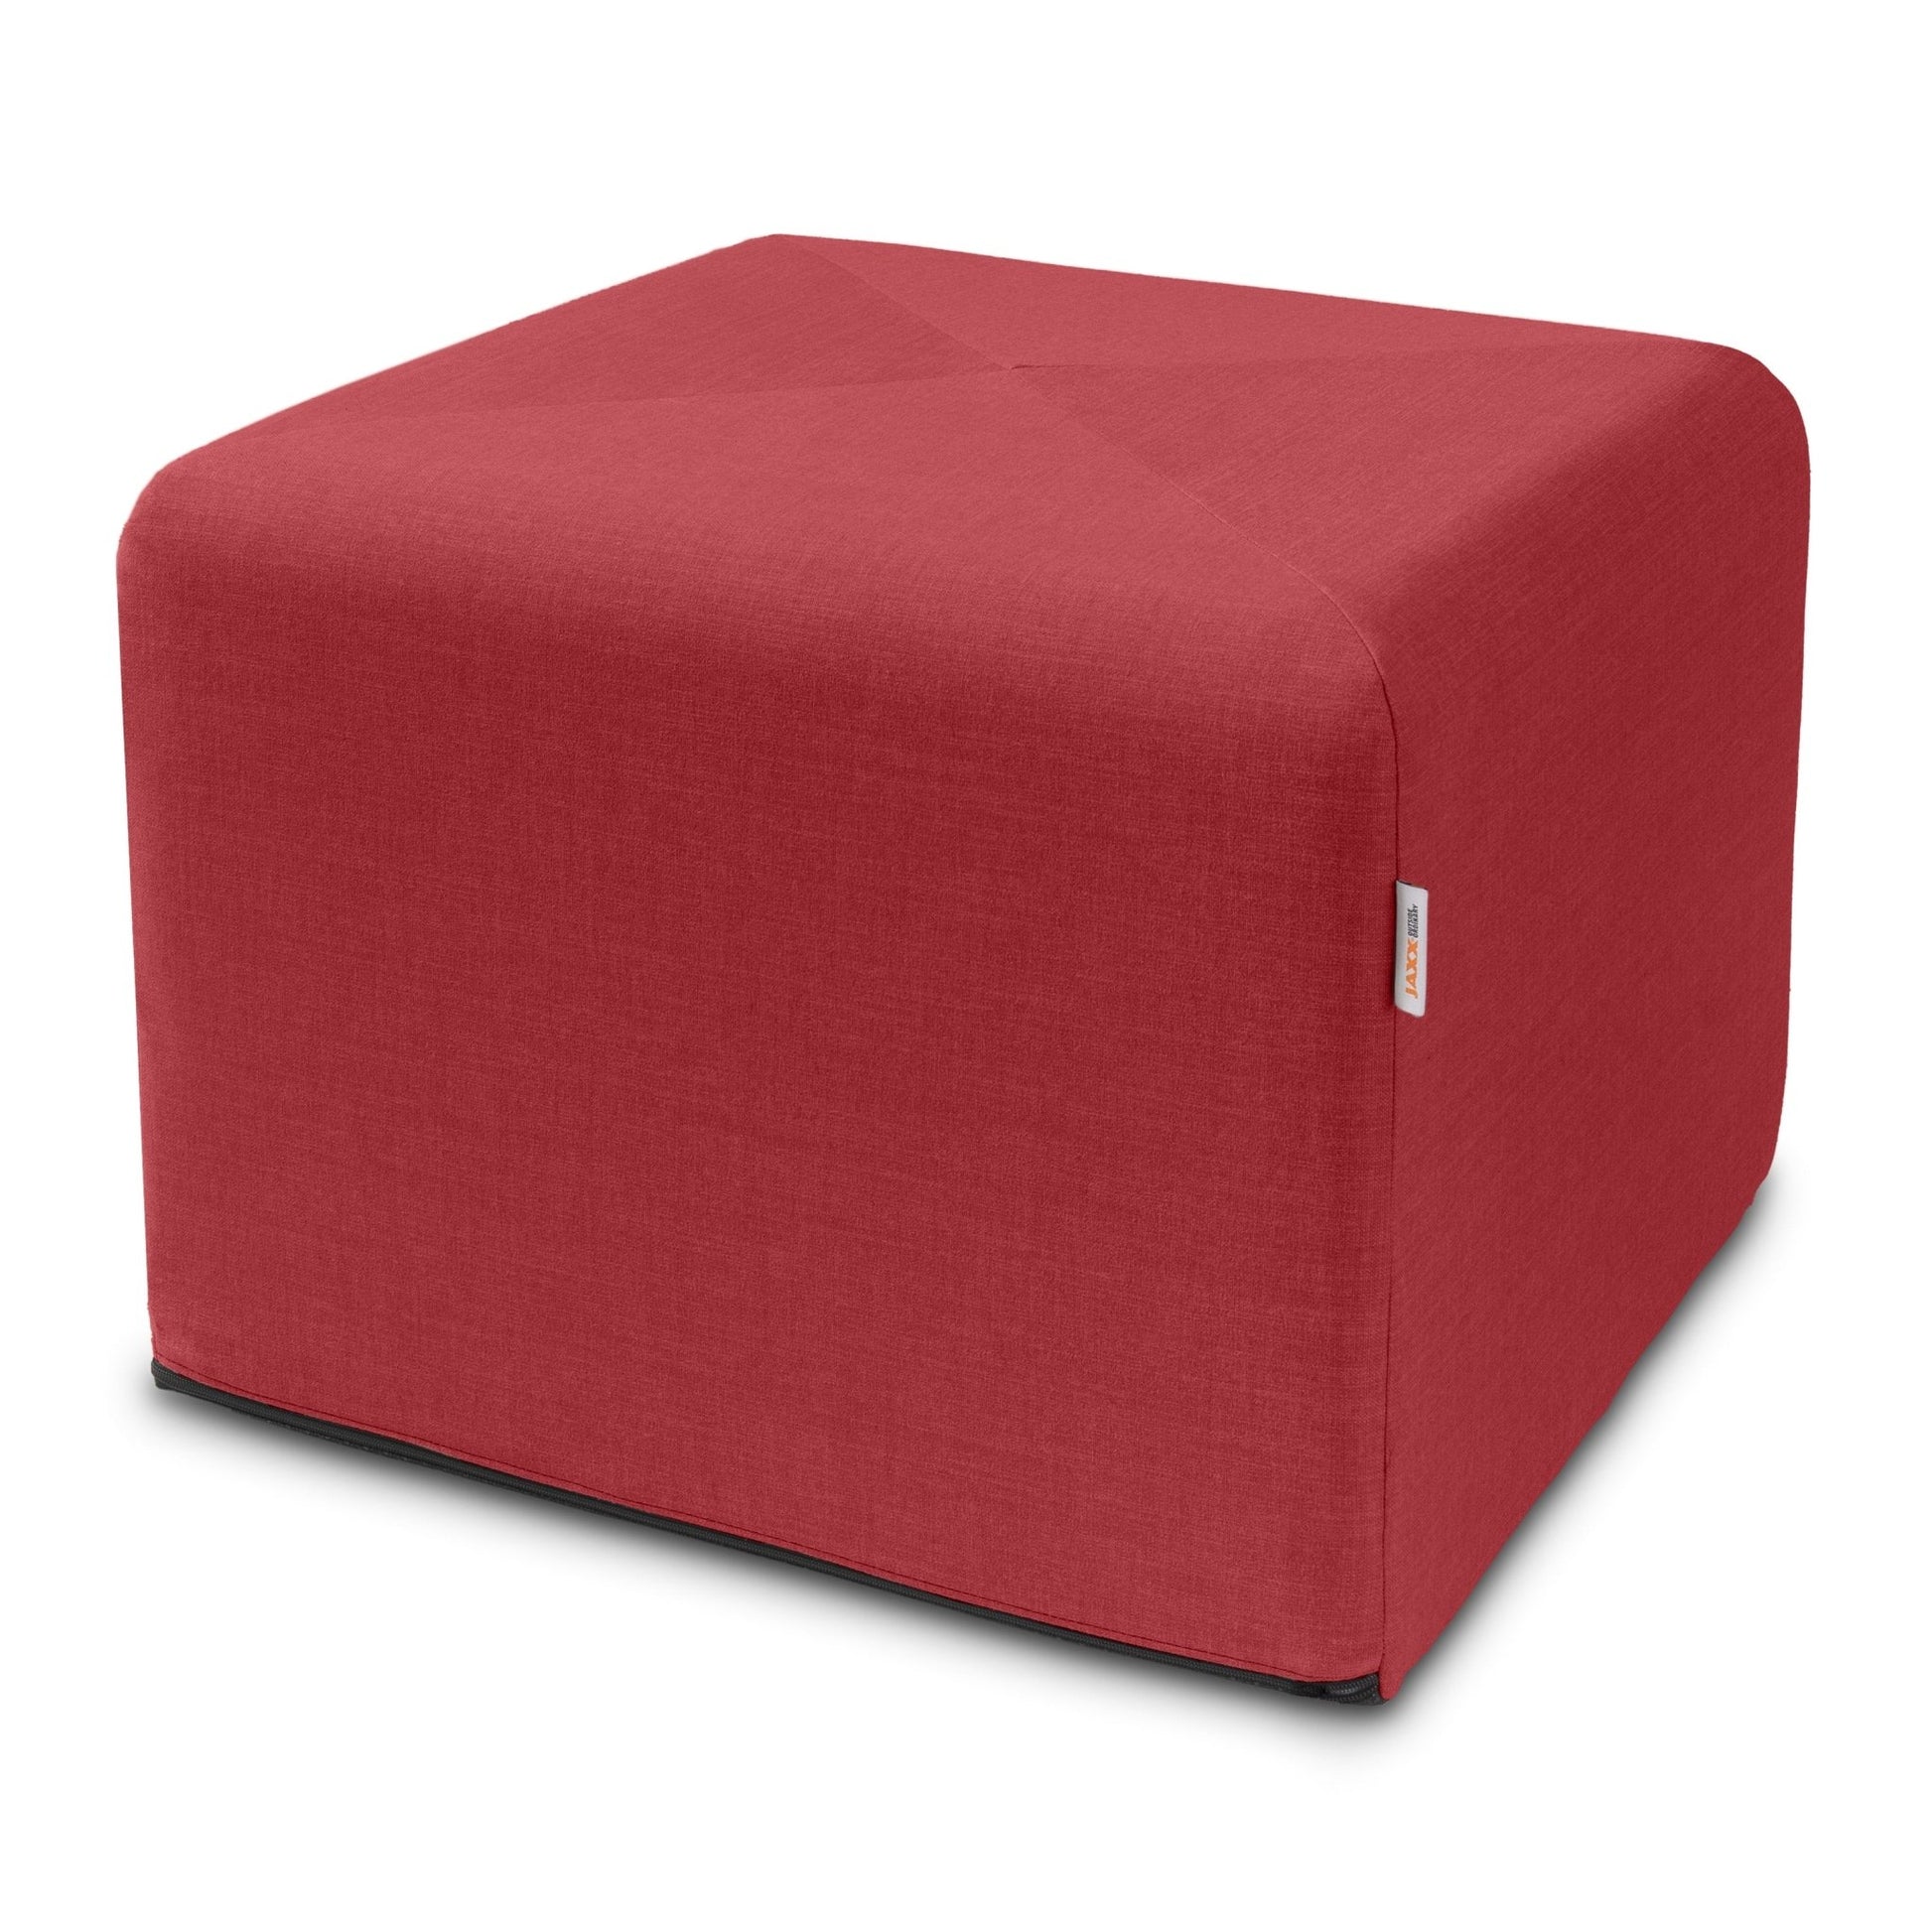 Jaxx Monroe Square Foam Ottoman with Stain Resistant Performance Fabric, Large (24 x 24 x 18) (19771) - SchoolOutlet